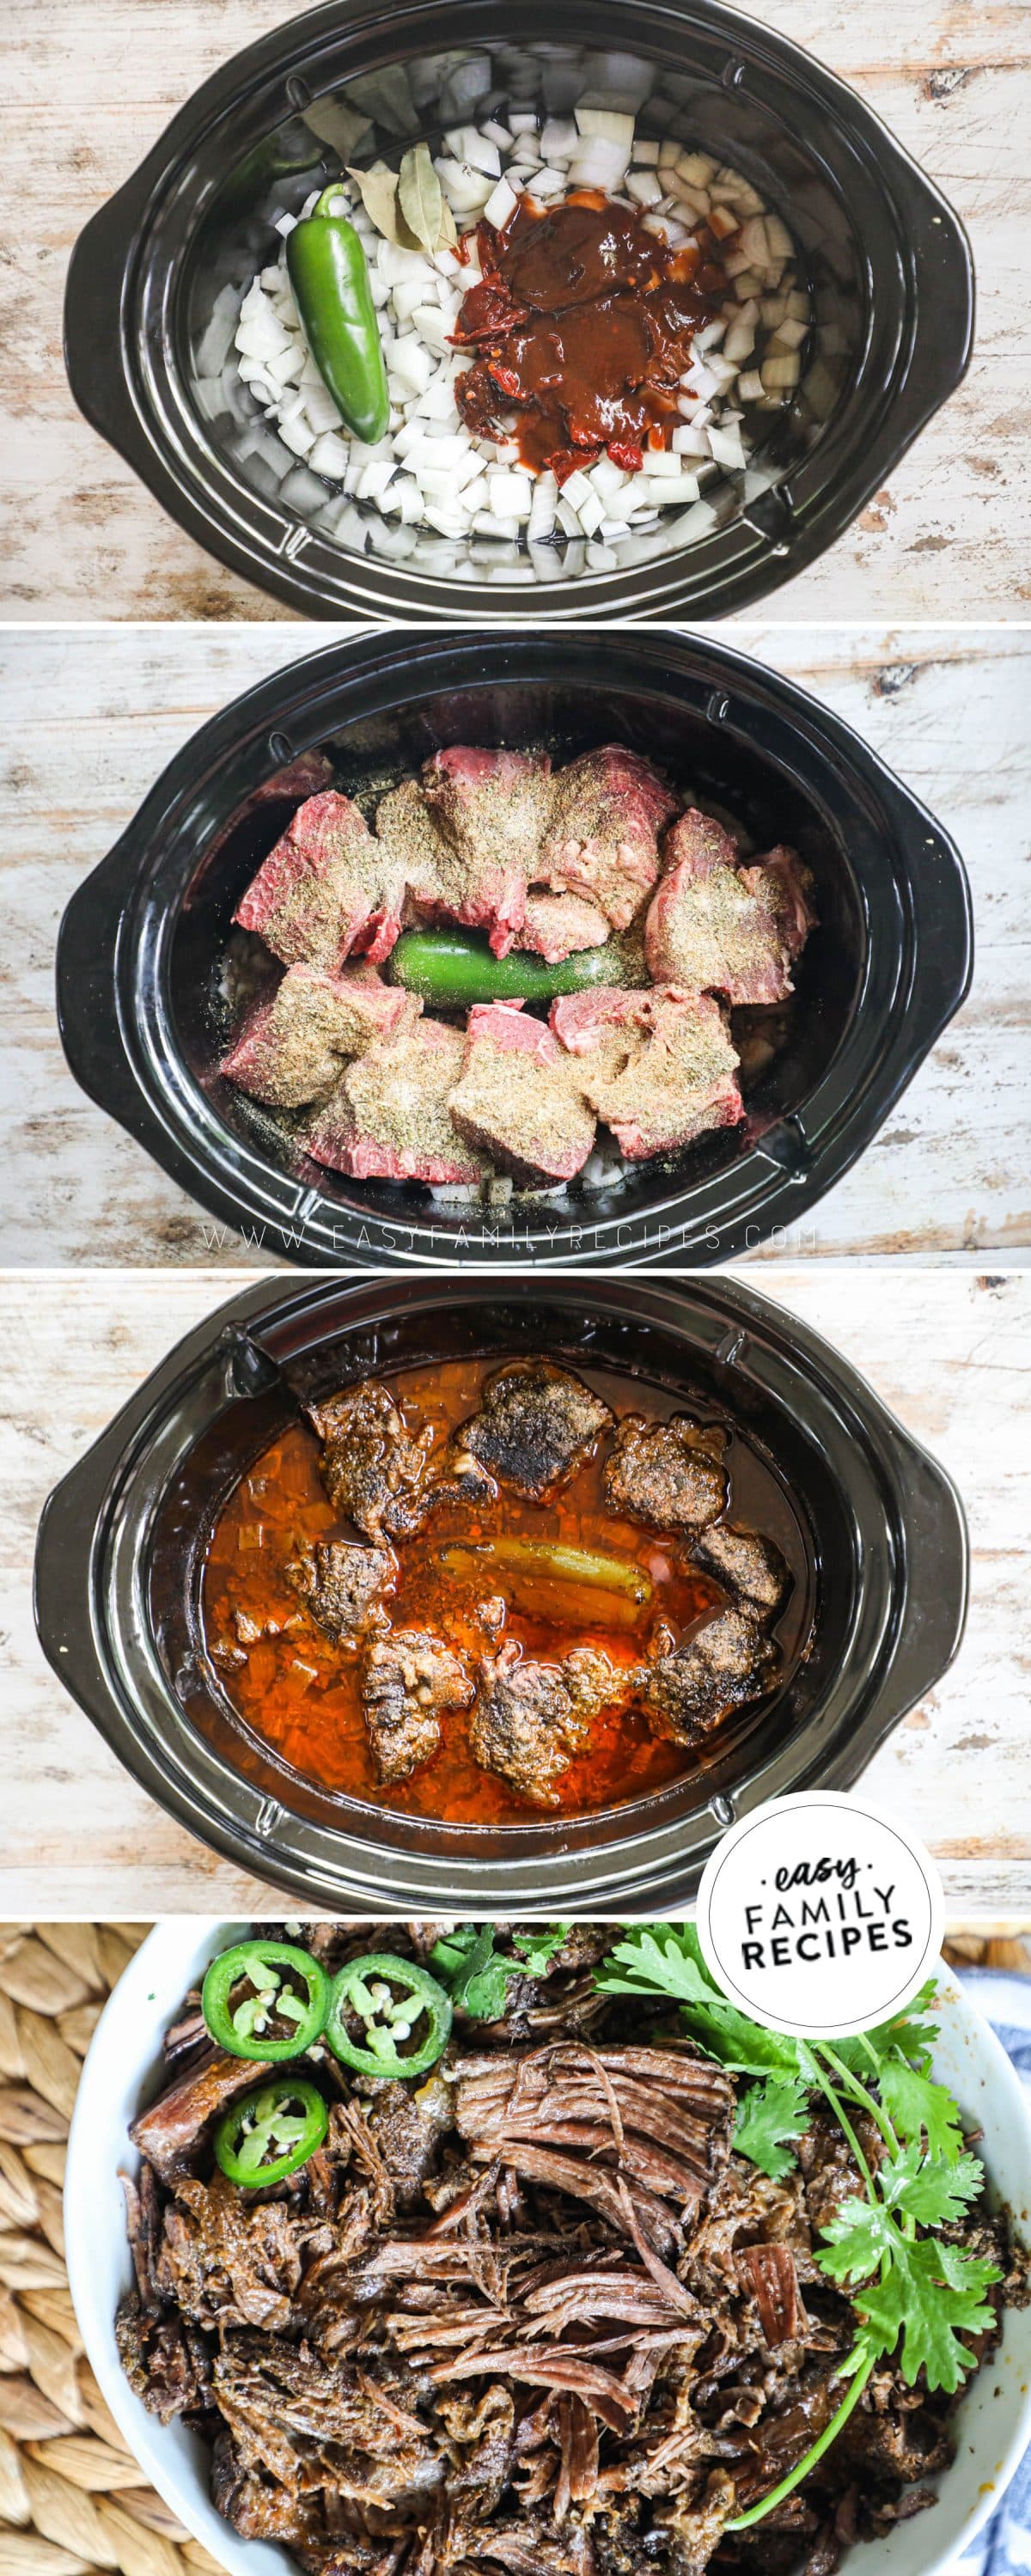 how to make beef barbacoa 1)add ingredients to Crock Pot 2)add beef 3)cook 4)shred and serve.